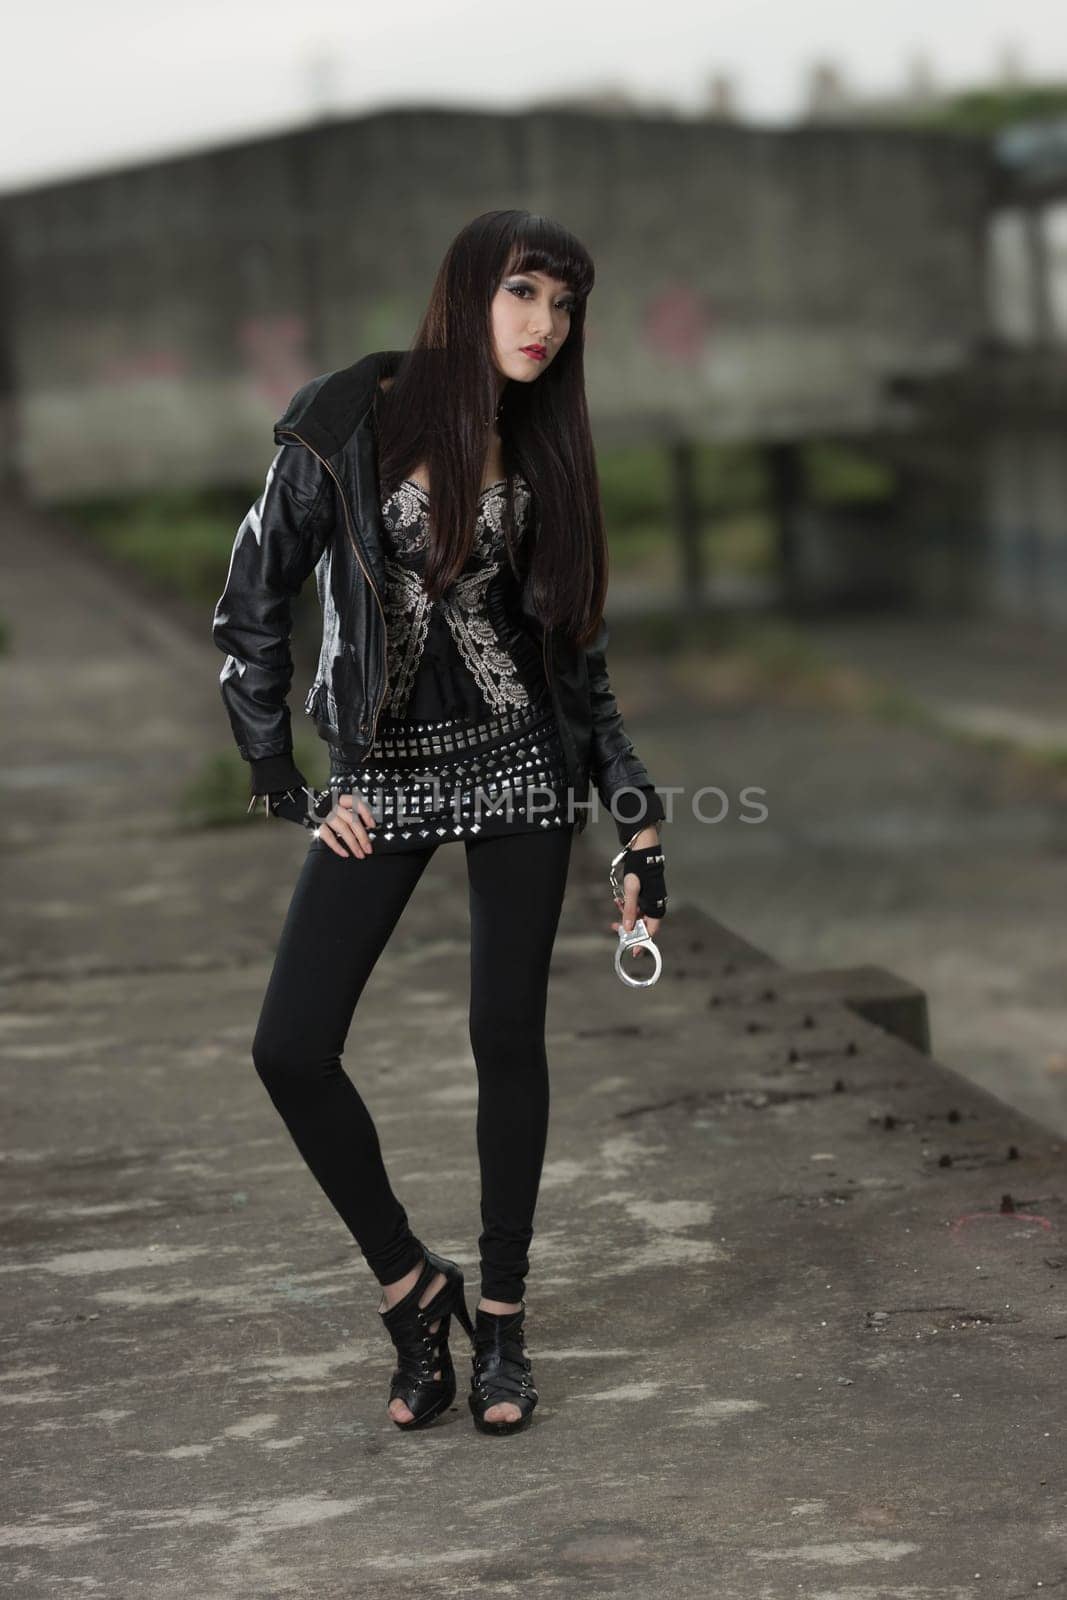 Asian American woman in emo goth clothing at an abandoned building